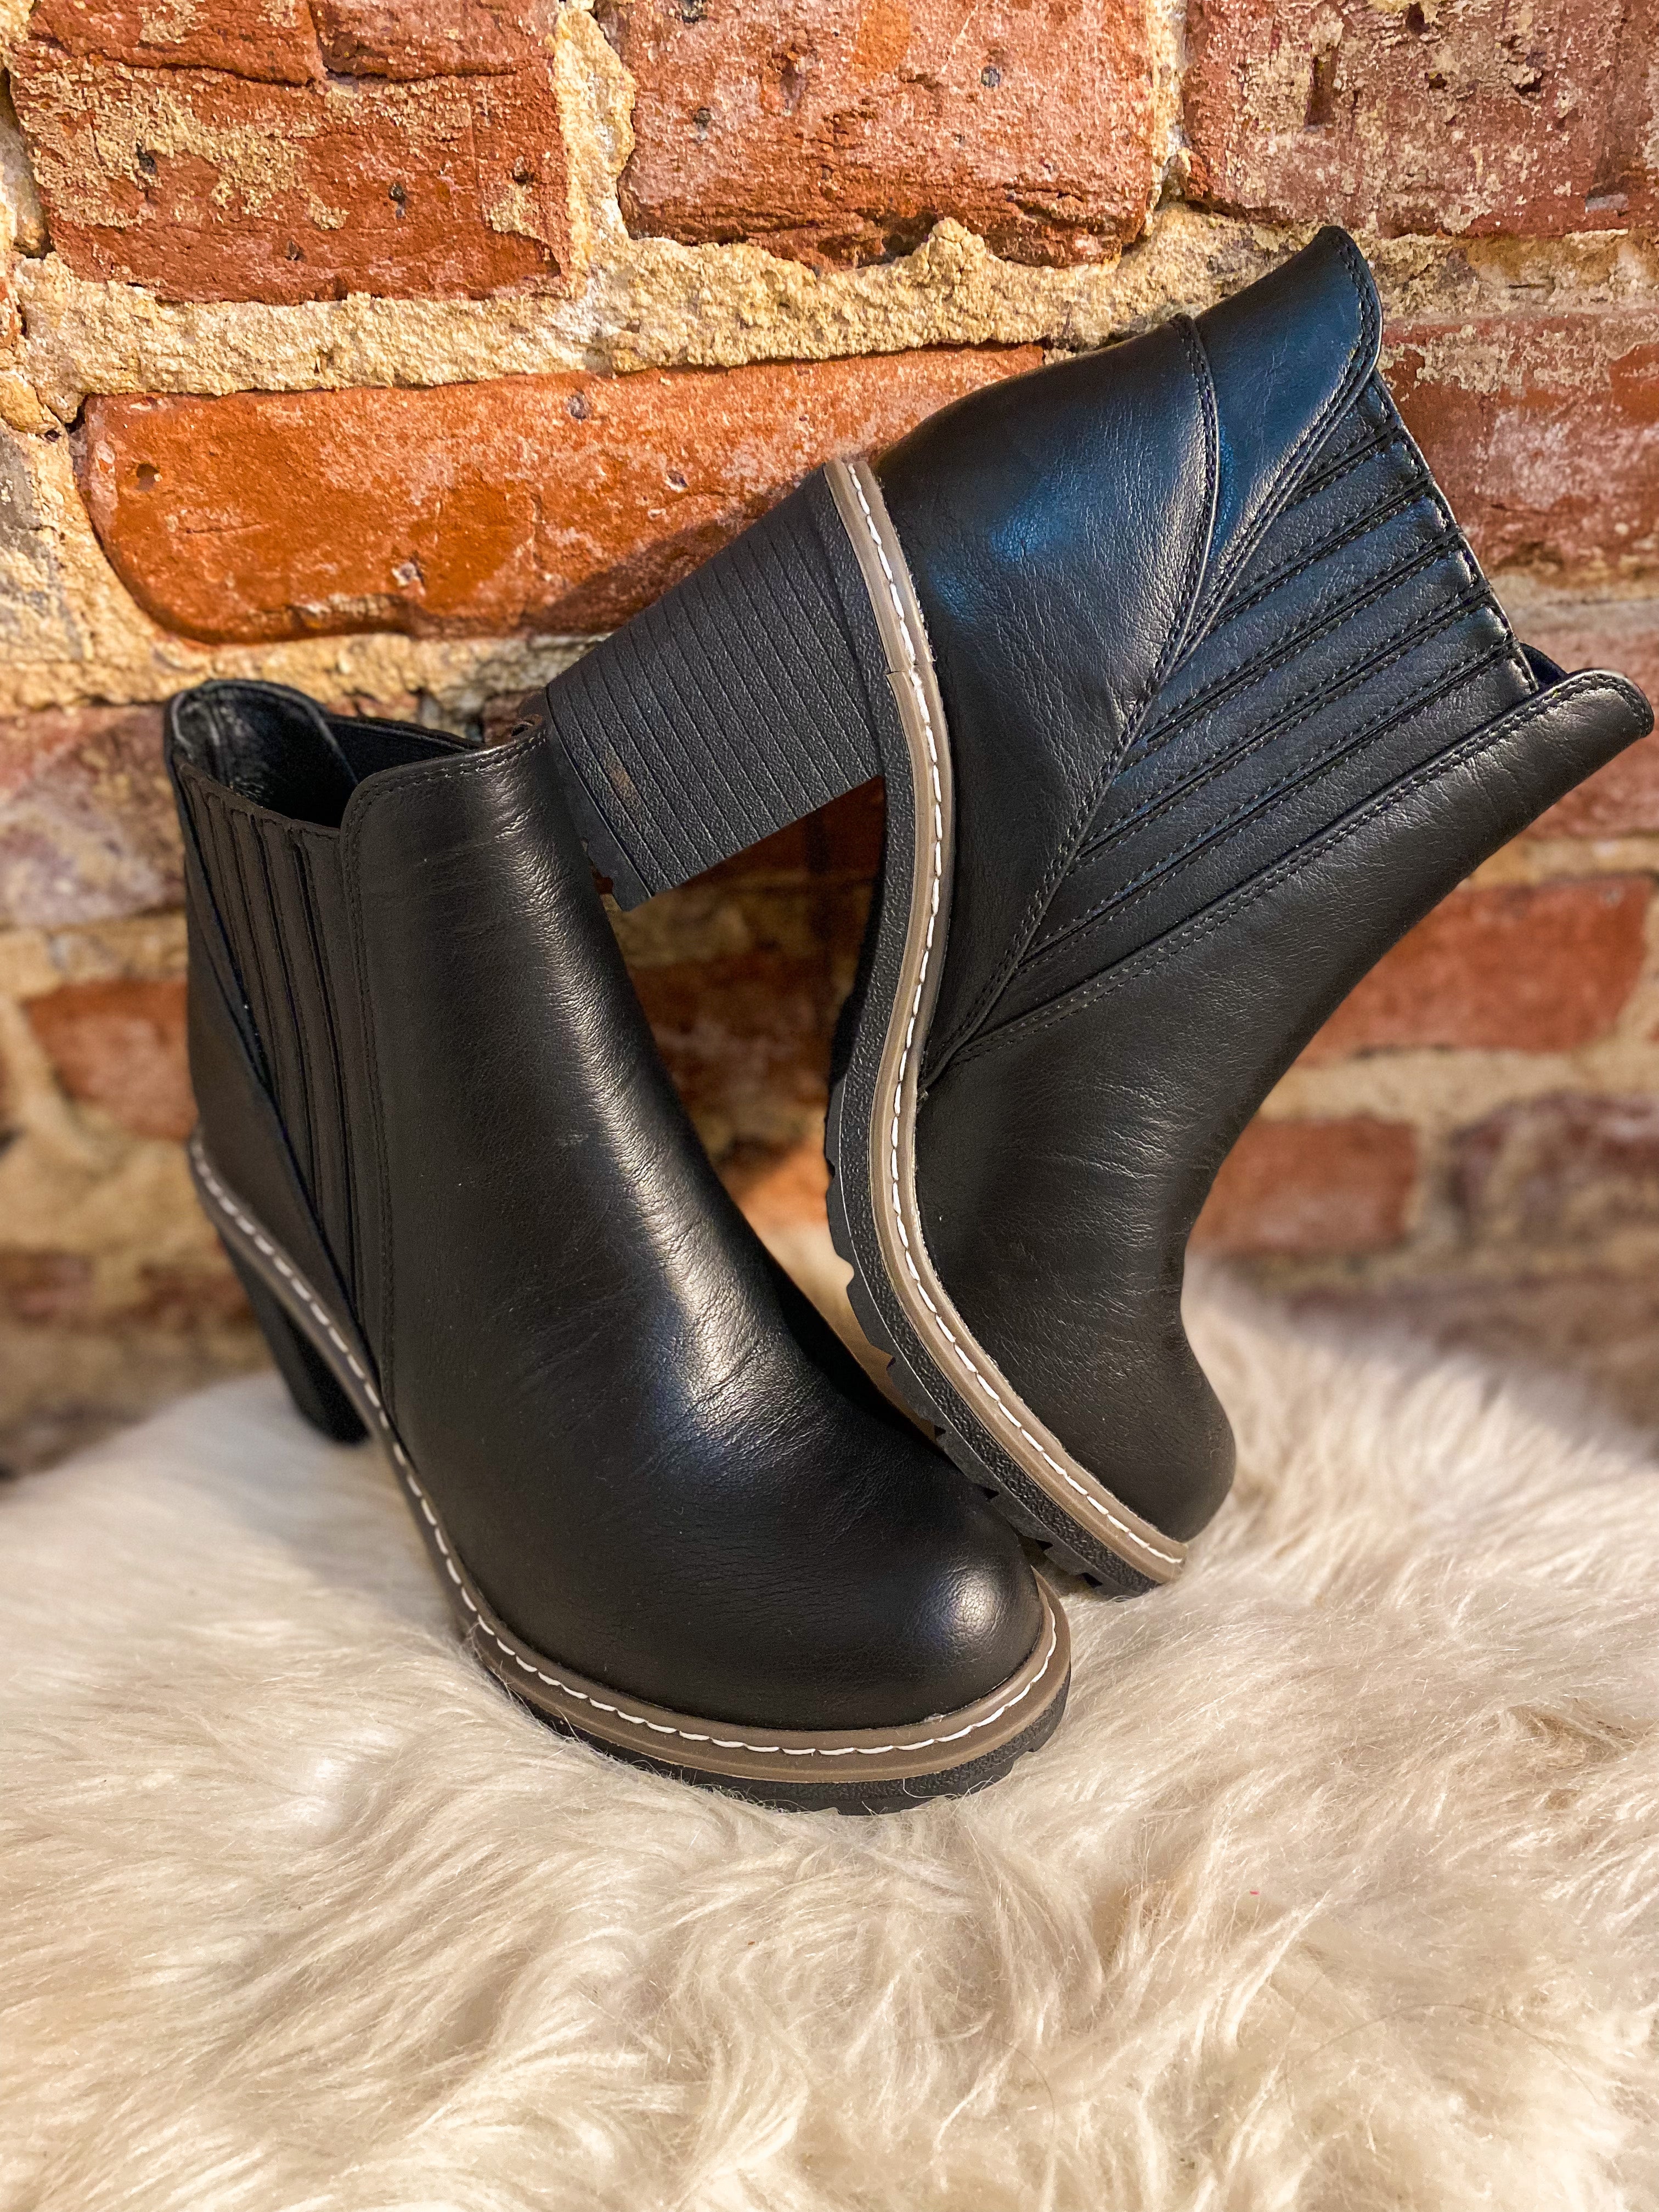 Boutique by Corkys Pecan Pie Black Ankle Booties